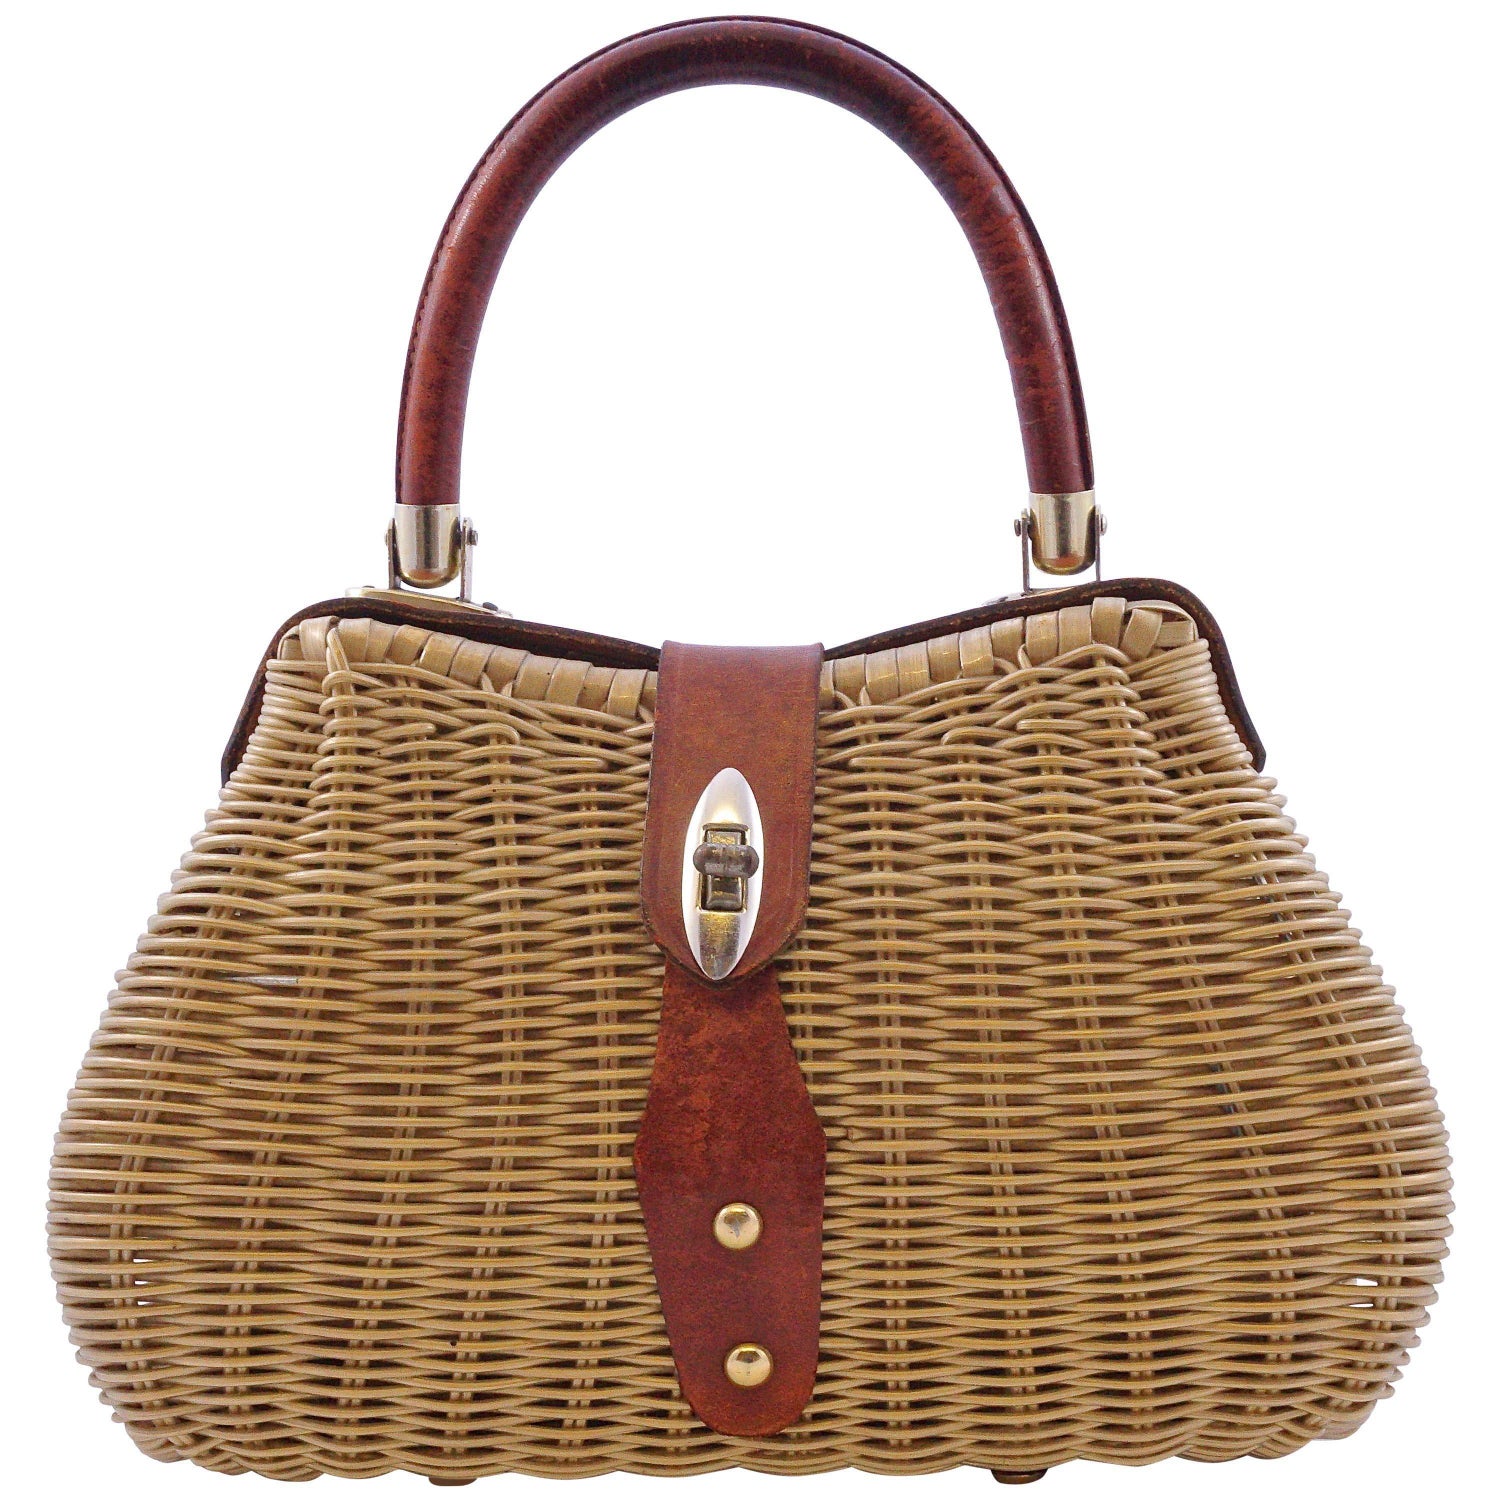 The Timeless Appeal of the Wicker Clutch Purse for Fashion-Forward Women